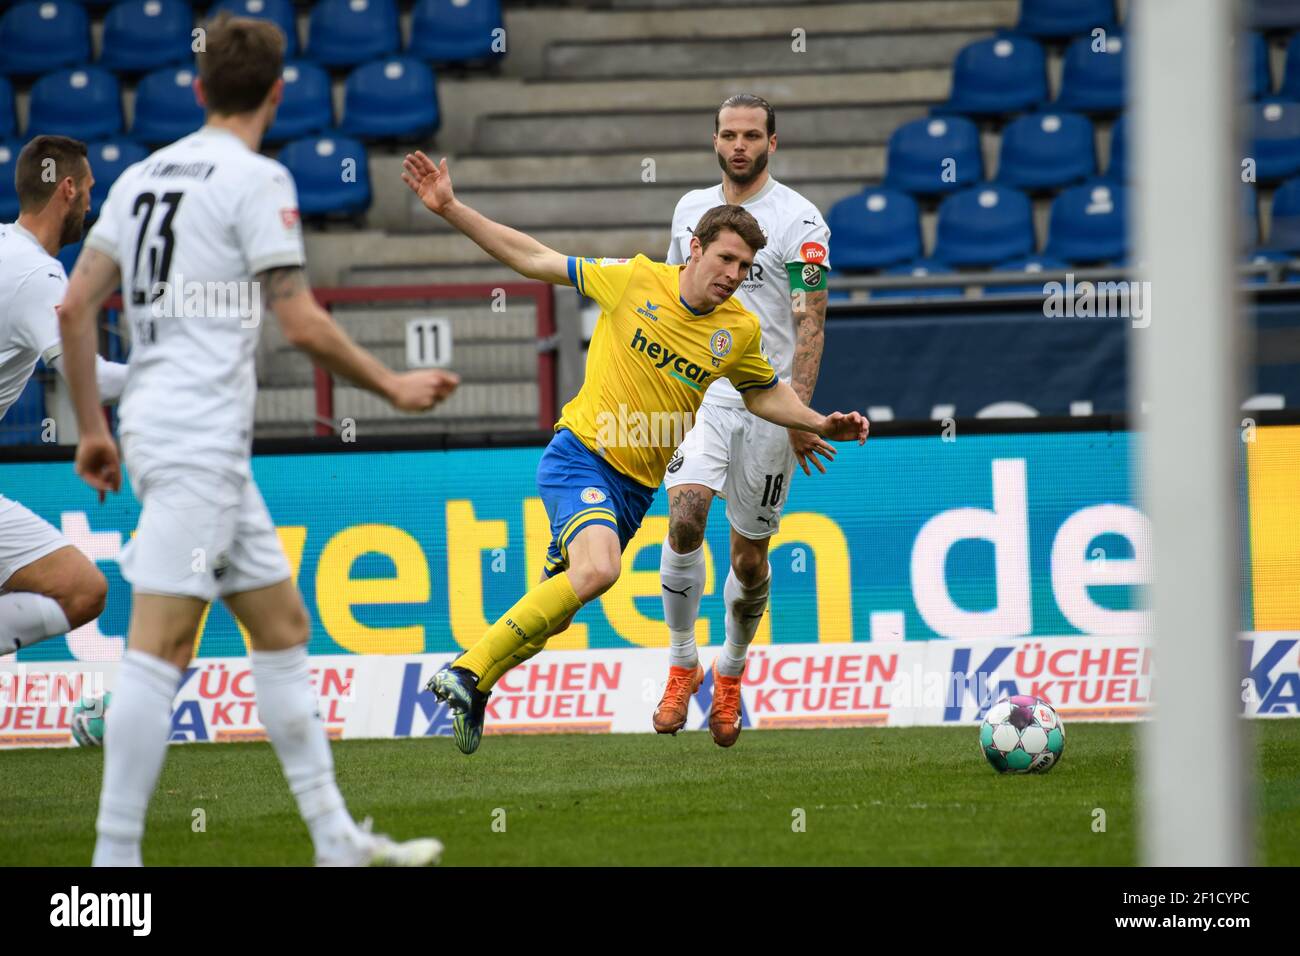 Brunswick, Germany. 07th Mar, 2021. Football: 2. Bundesliga, Eintracht Braunschweig - SV Sandhausen, Matchday 24 at Eintracht-Stadion. Braunschweig defender Lasse Schlüter shoots the ball. Credit: Swen Pförtner/dpa - IMPORTANT NOTE: In accordance with the regulations of the DFL Deutsche Fußball Liga and/or the DFB Deutscher Fußball-Bund, it is prohibited to use or have used photographs taken in the stadium and/or of the match in the form of sequence pictures and/or video-like photo series./dpa/Alamy Live News Stock Photo